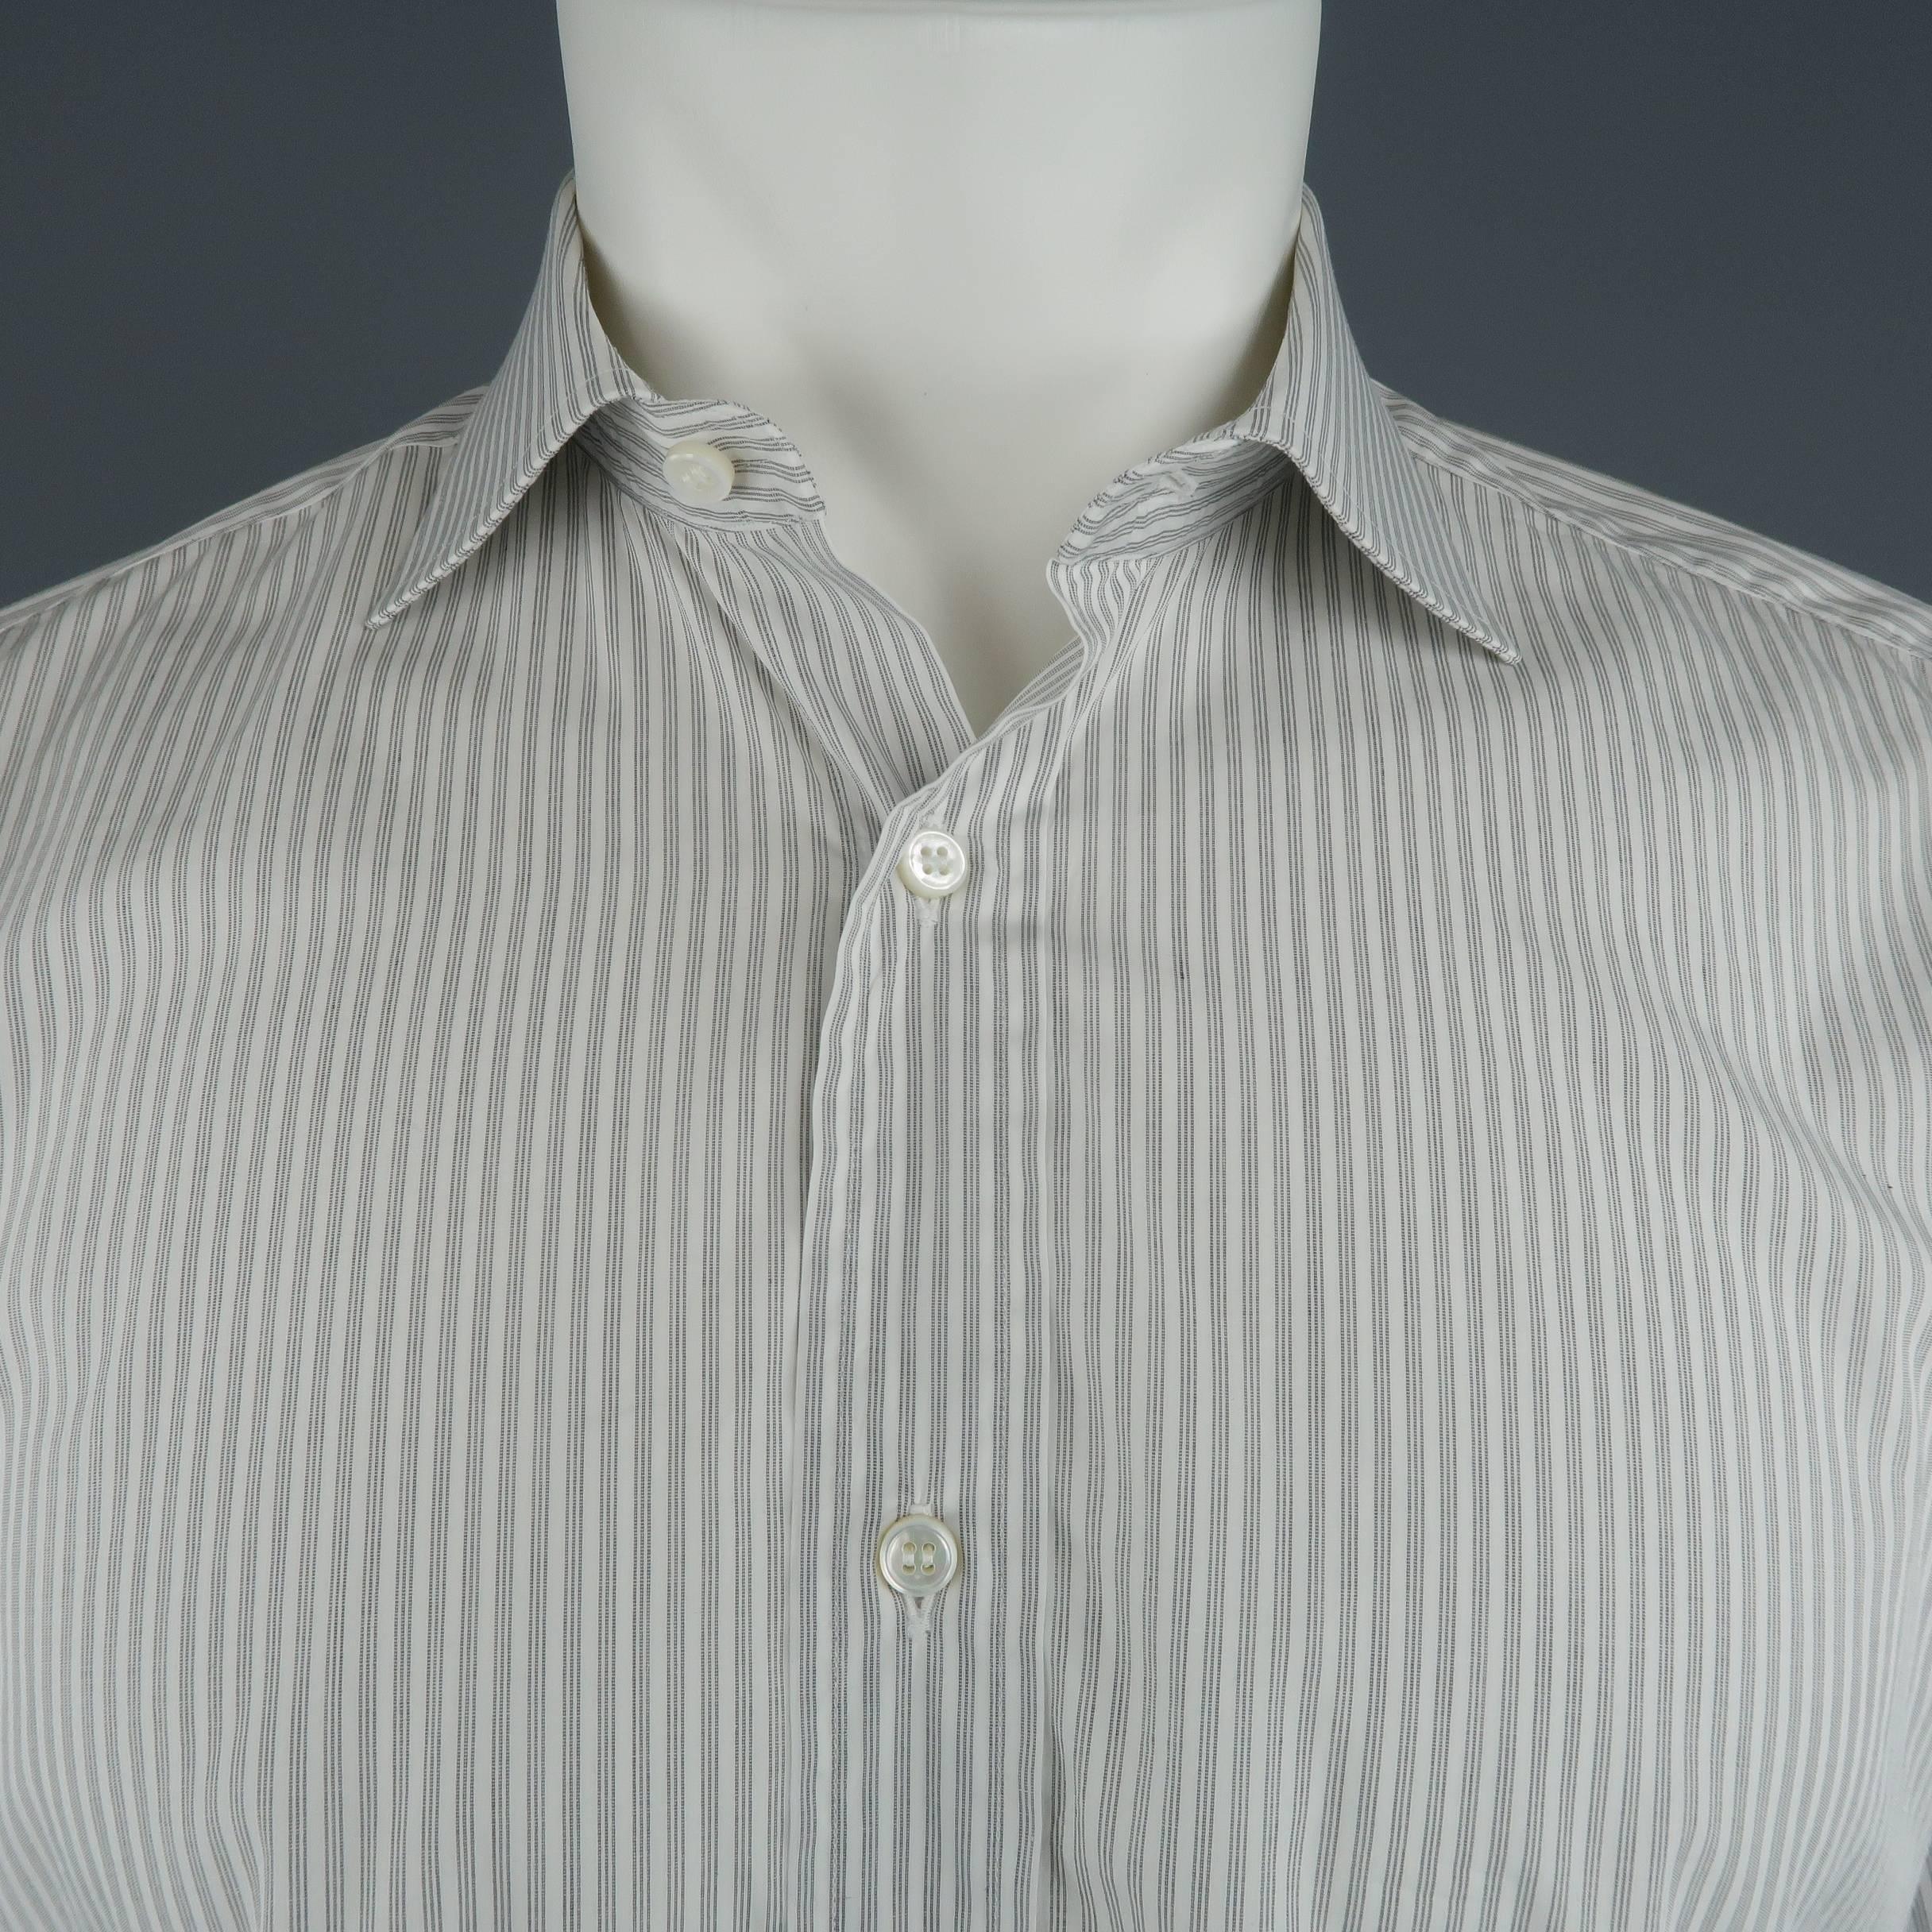 Classic BRIONI dress shirt comes in striped cotton with a spread collar and French cuffs. Cuff links not included. Made in Italy.
 
Good Pre-Owned Condition.
Marked: 39/15.5
 
Measurements:
 
Shoulder: 16 in.
Chest: 46 in.
Sleeve: 24 in.
Length: 31